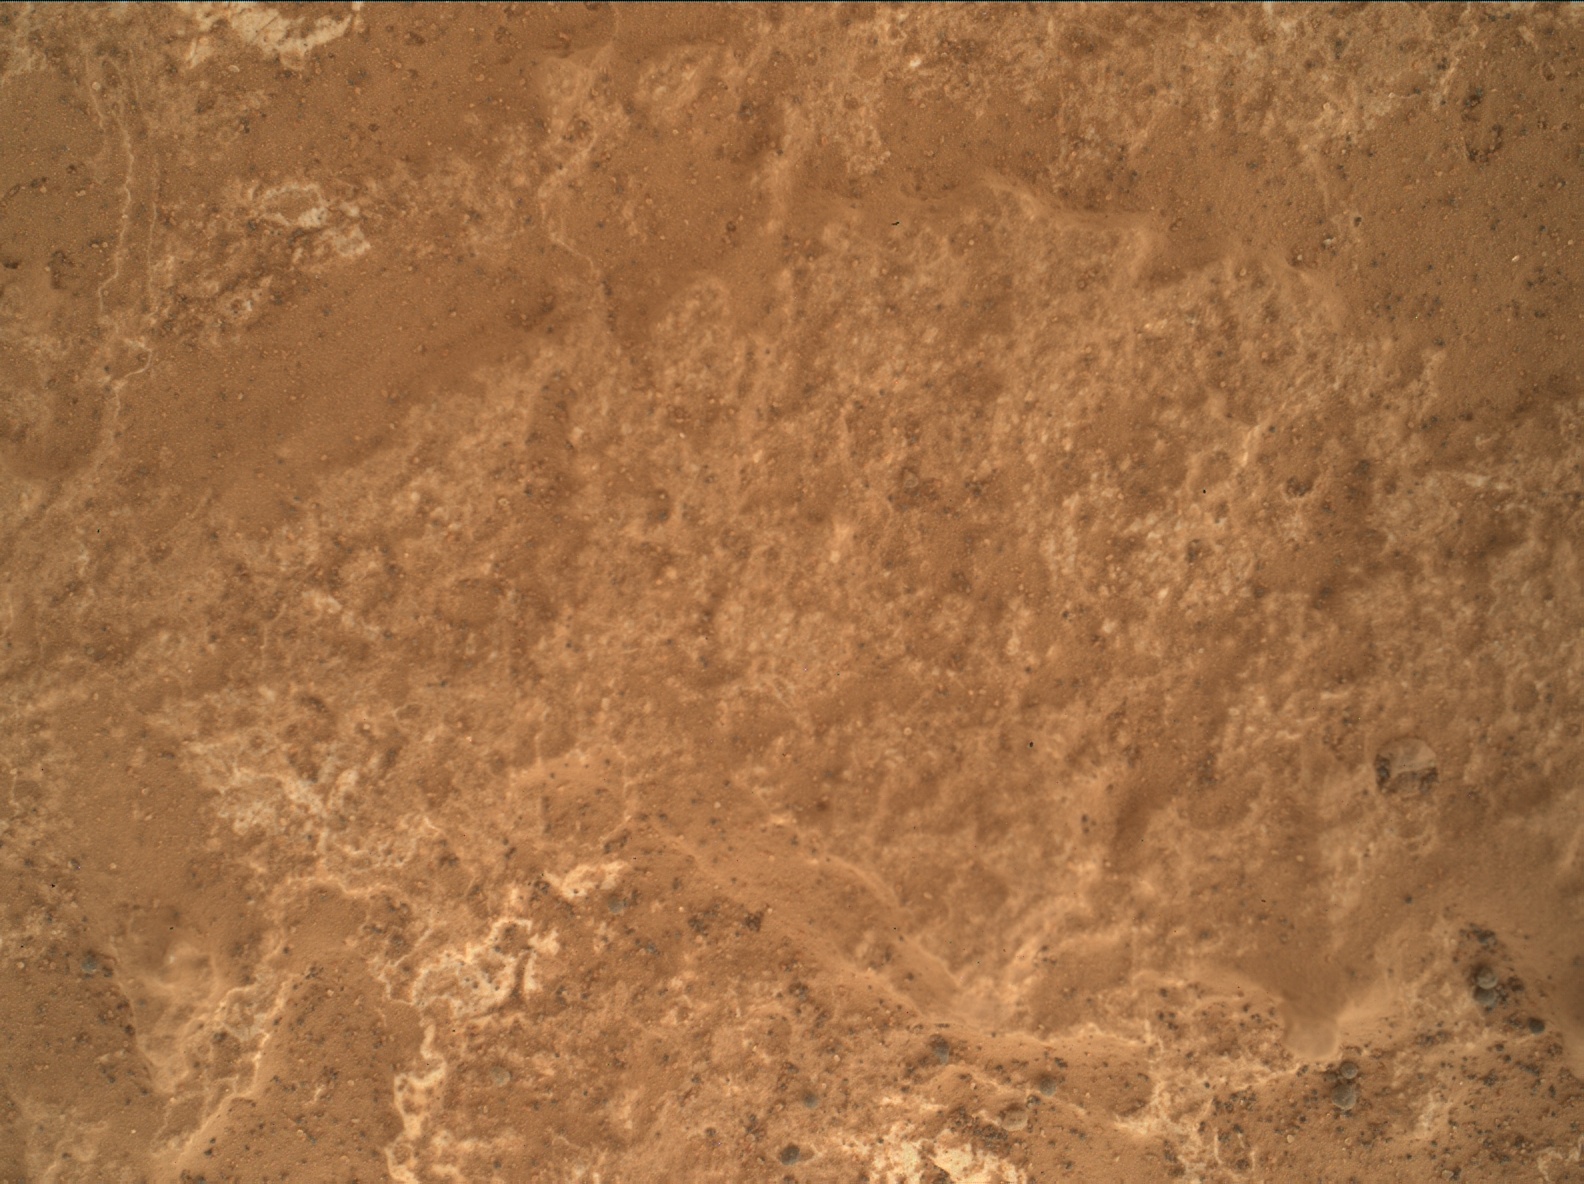 Nasa's Mars rover Curiosity acquired this image using its Mars Hand Lens Imager (MAHLI) on Sol 1732